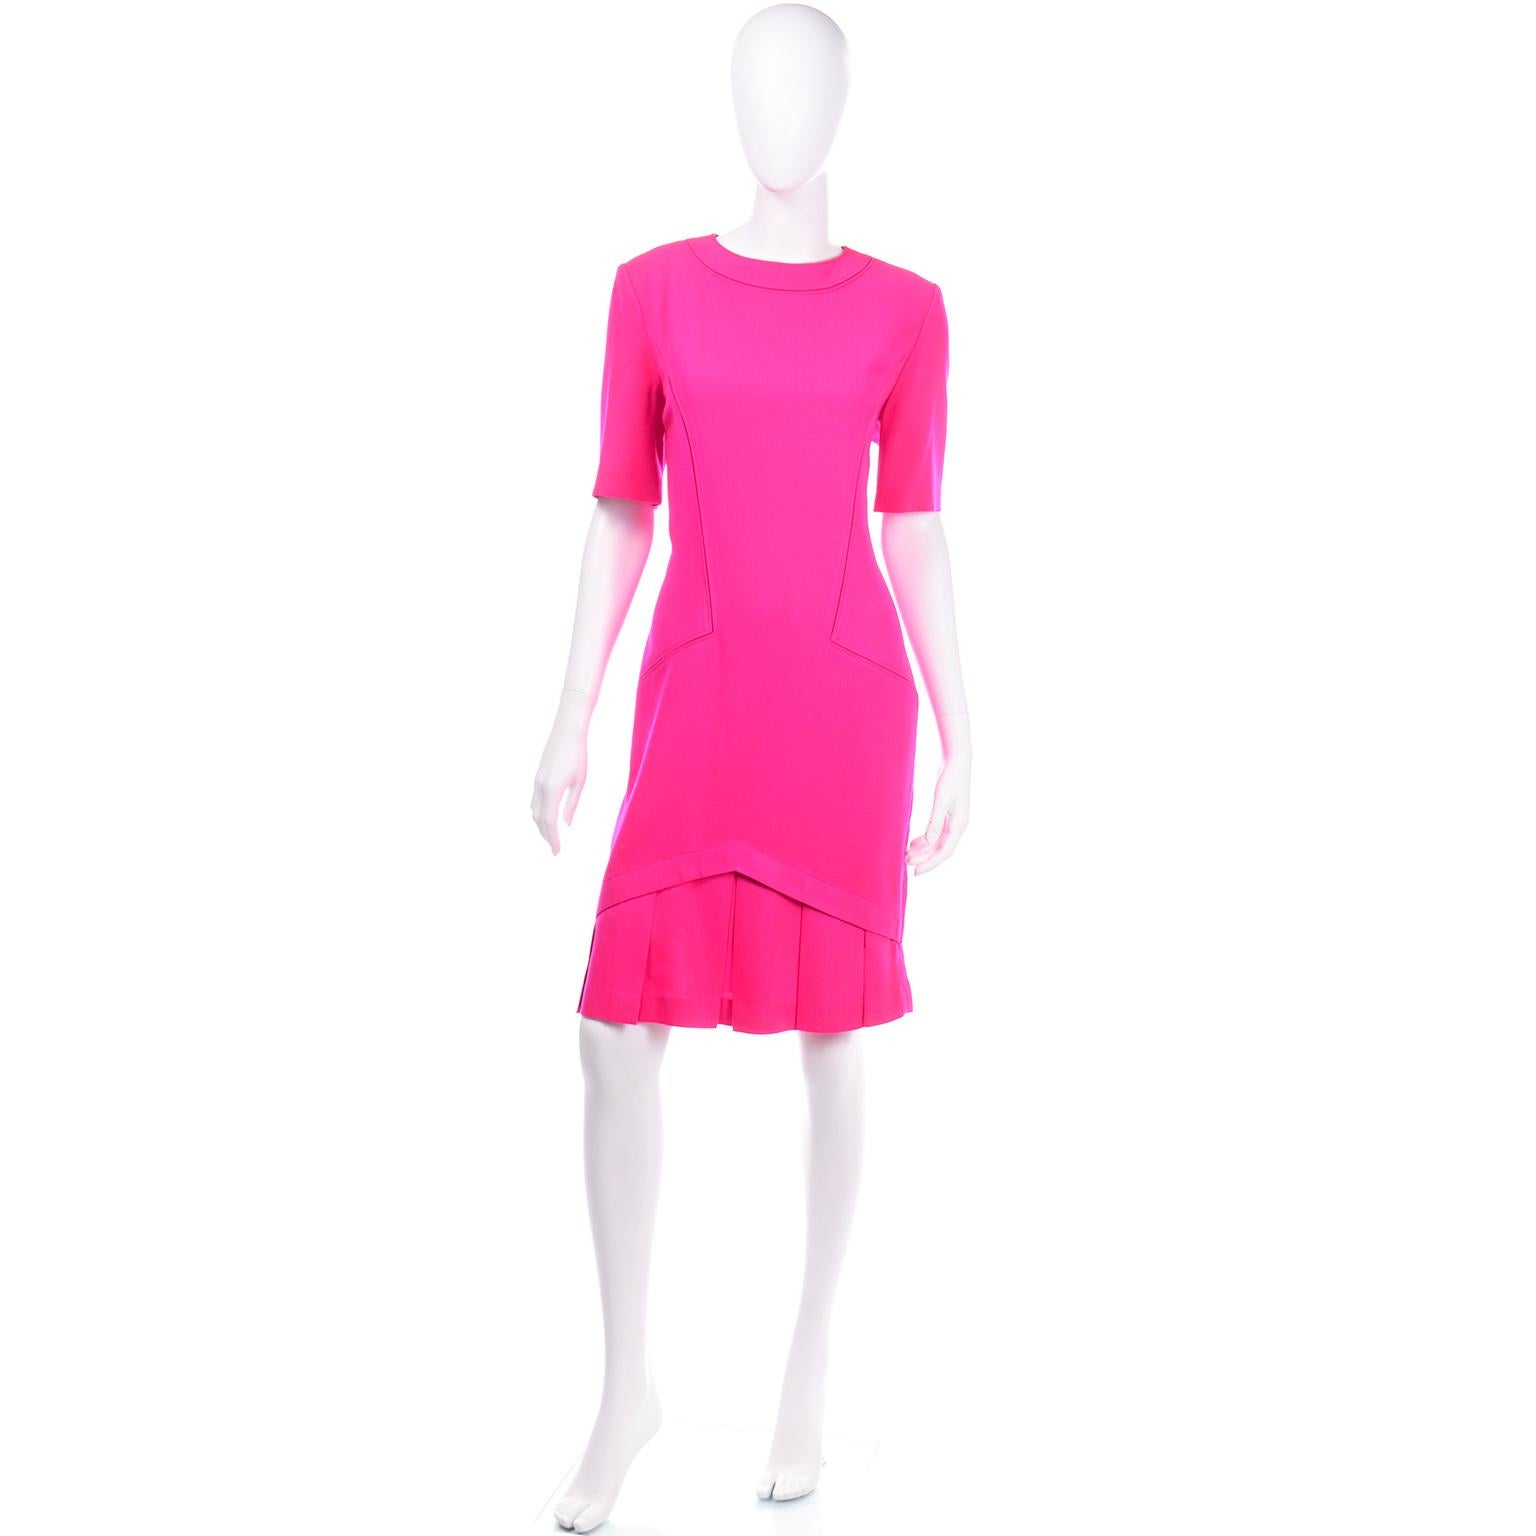 We instantly fell in love with this vintage hot pink Louis Féraud dress! We love finding unique Louis Feraud pieces, and we always have discovered over the years that his pieces are definitely made to  last! This fabulous Spring/Summer weight wool